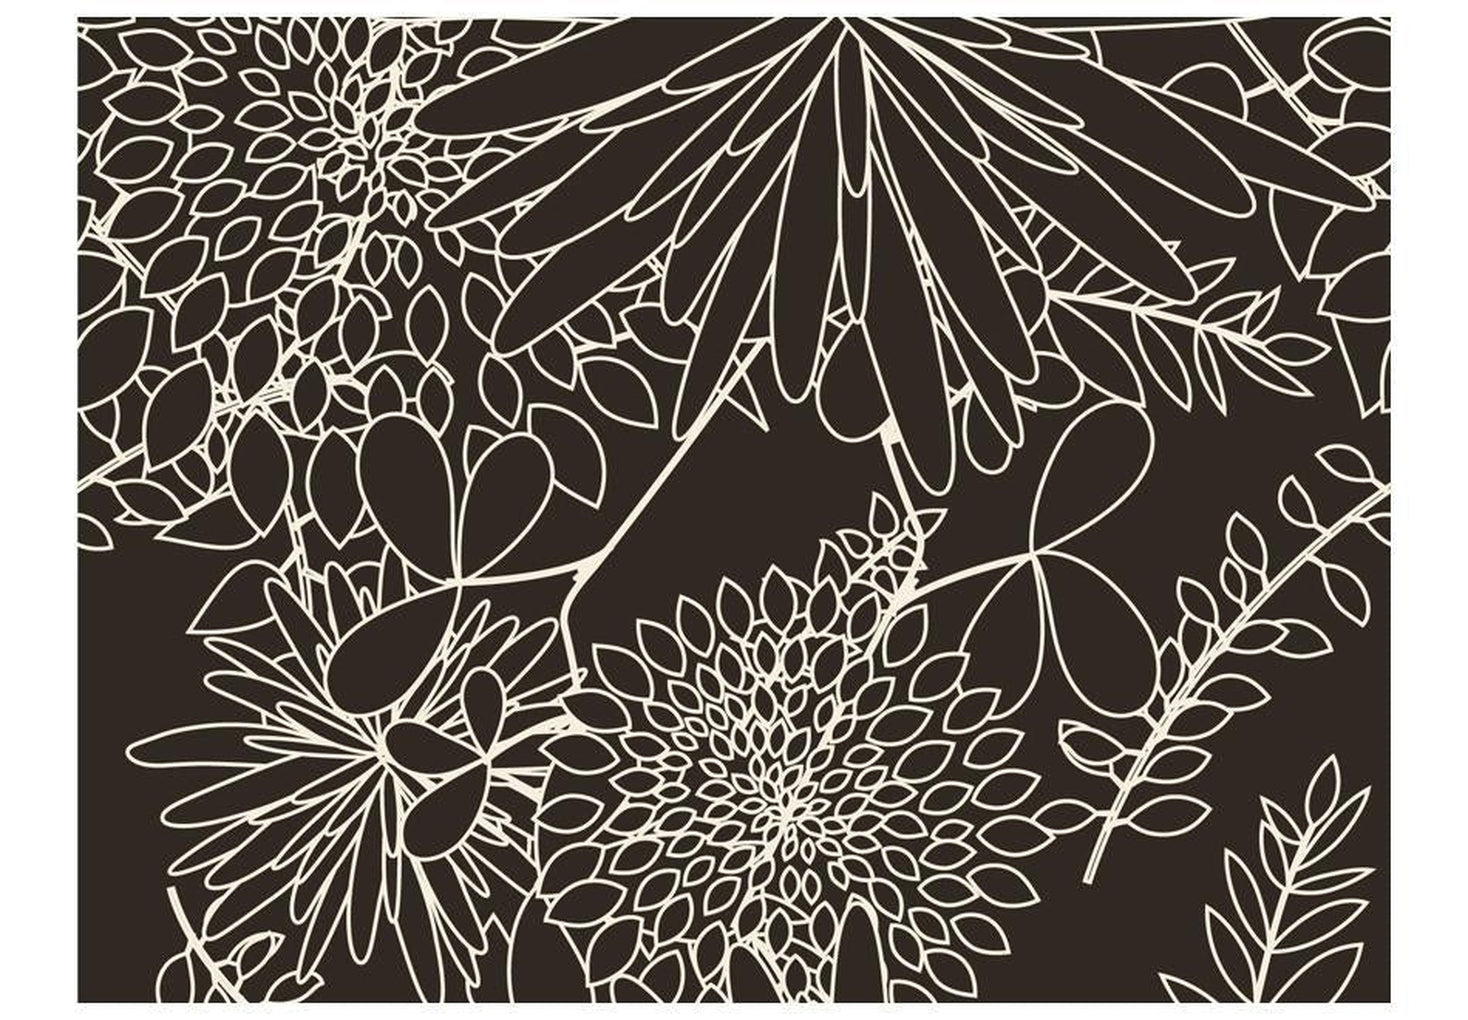 Wall mural - Black and white floral background-TipTopHomeDecor